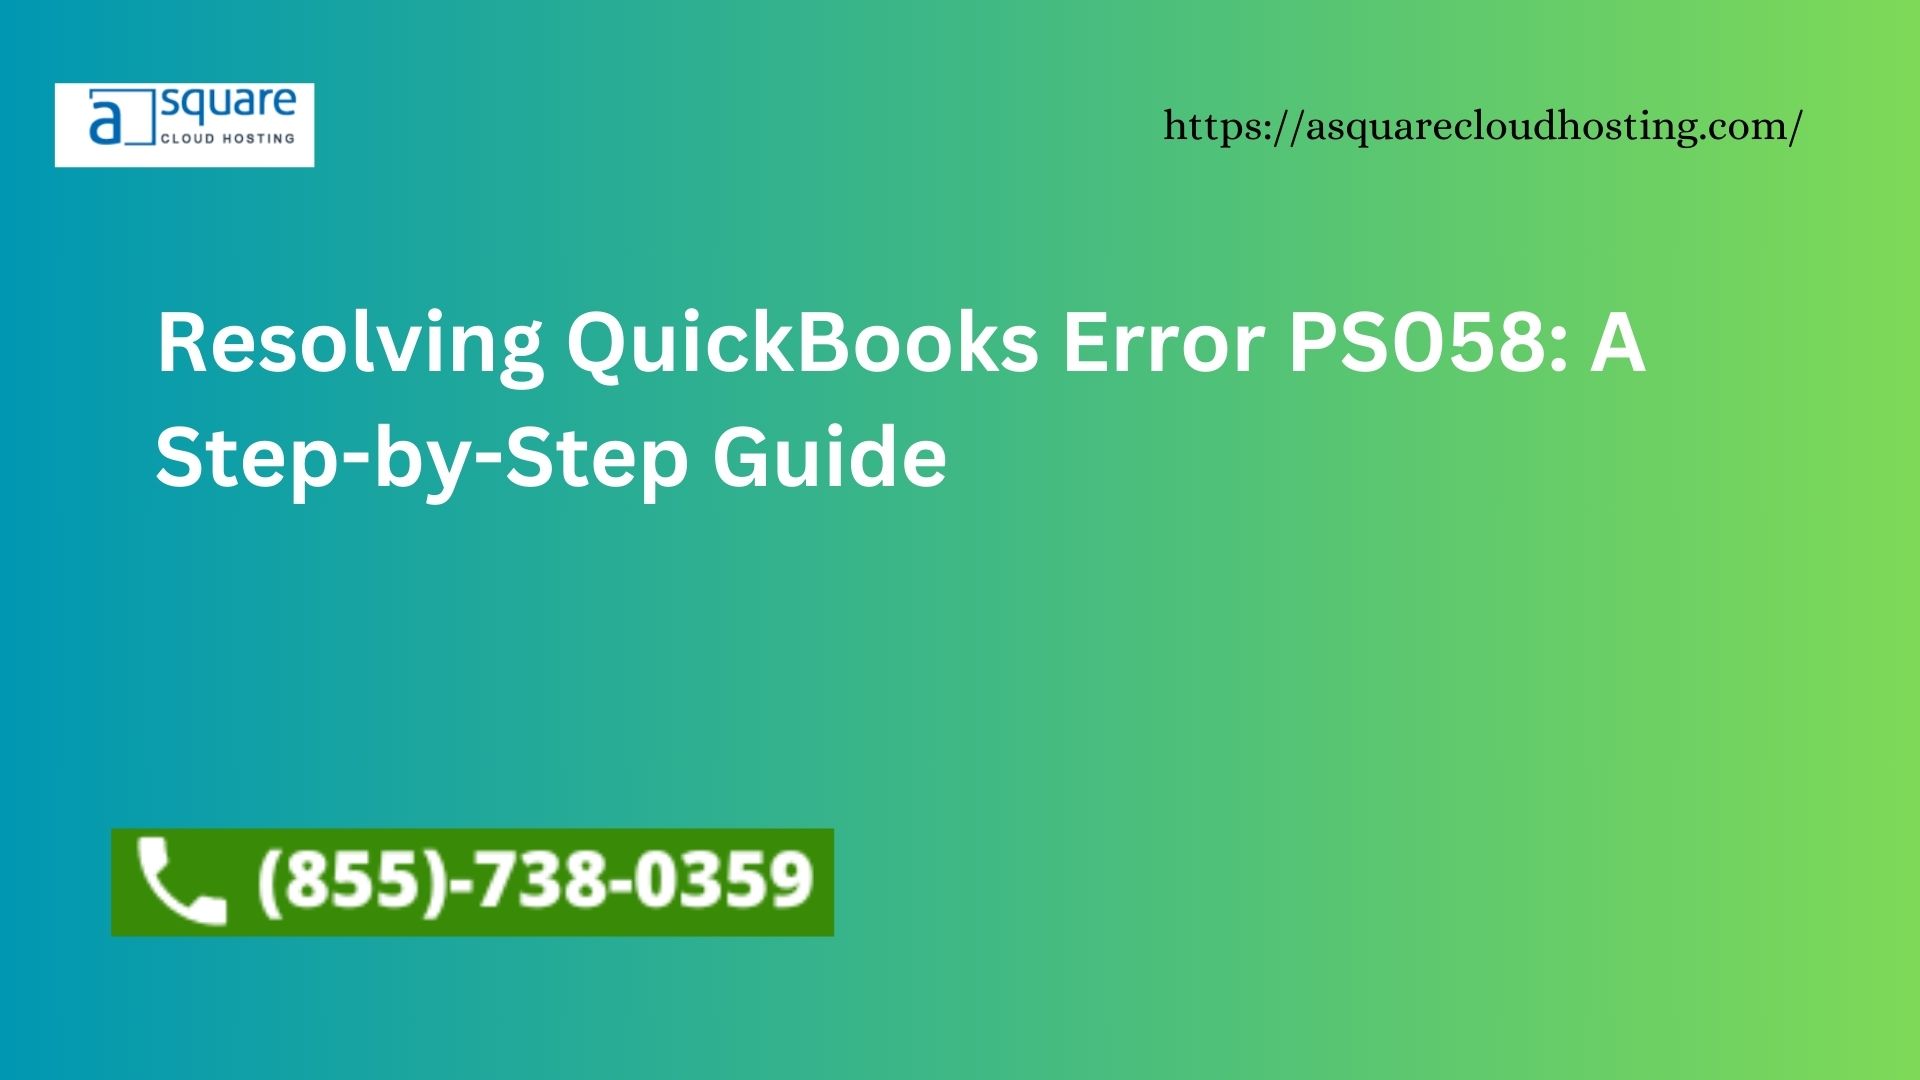 Resolving QuickBooks Error PS058: A Step-by-Step Guide